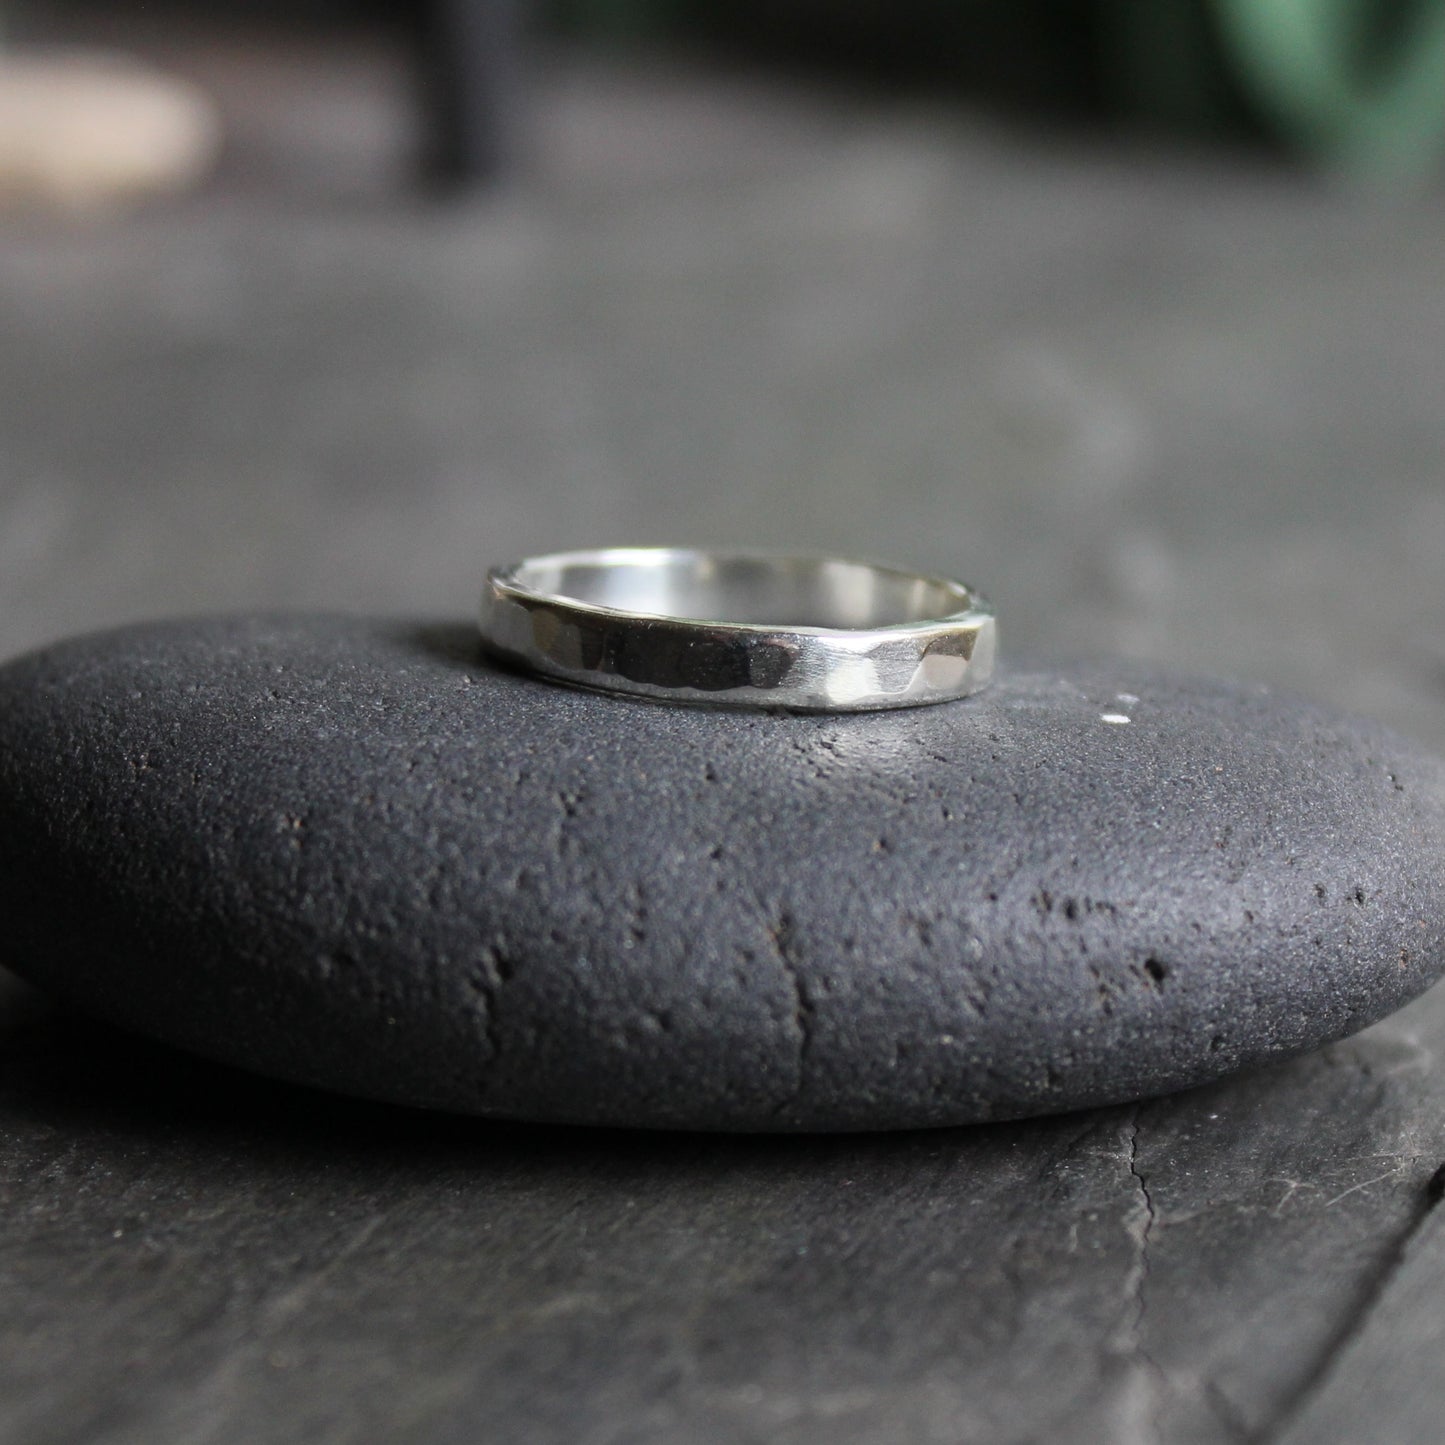 A handmade sterling silver 3mm wide ring with rounded edges and a hammered finish. 